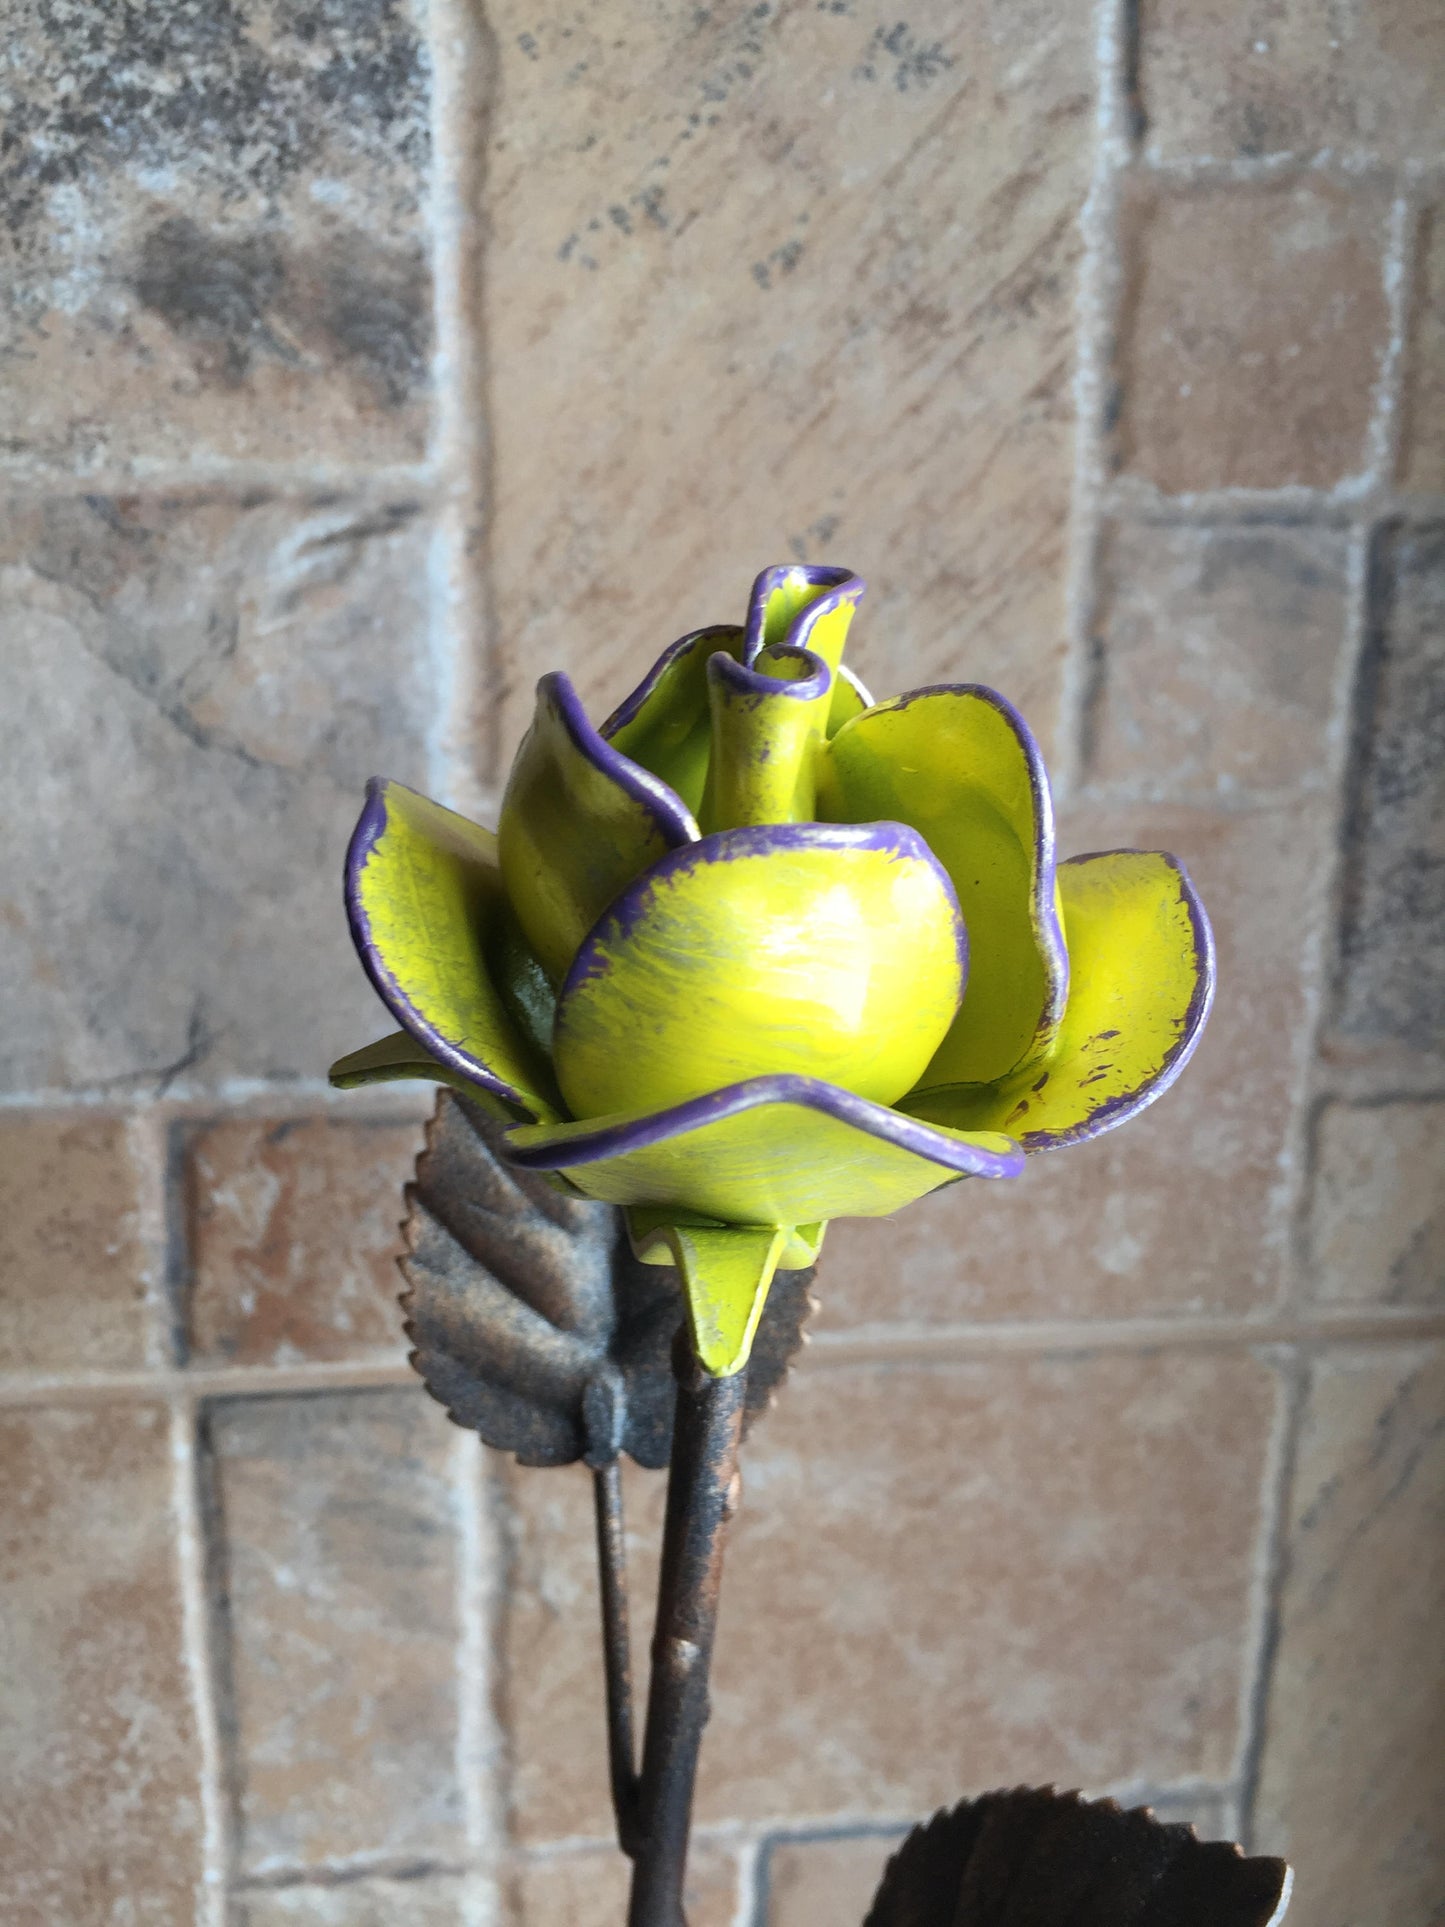 Iron rose, 6th anniversary gift, iron anniversary, hand forged rose, metal sculpture, metal rose, metal roses,forged rose, iron gift for her